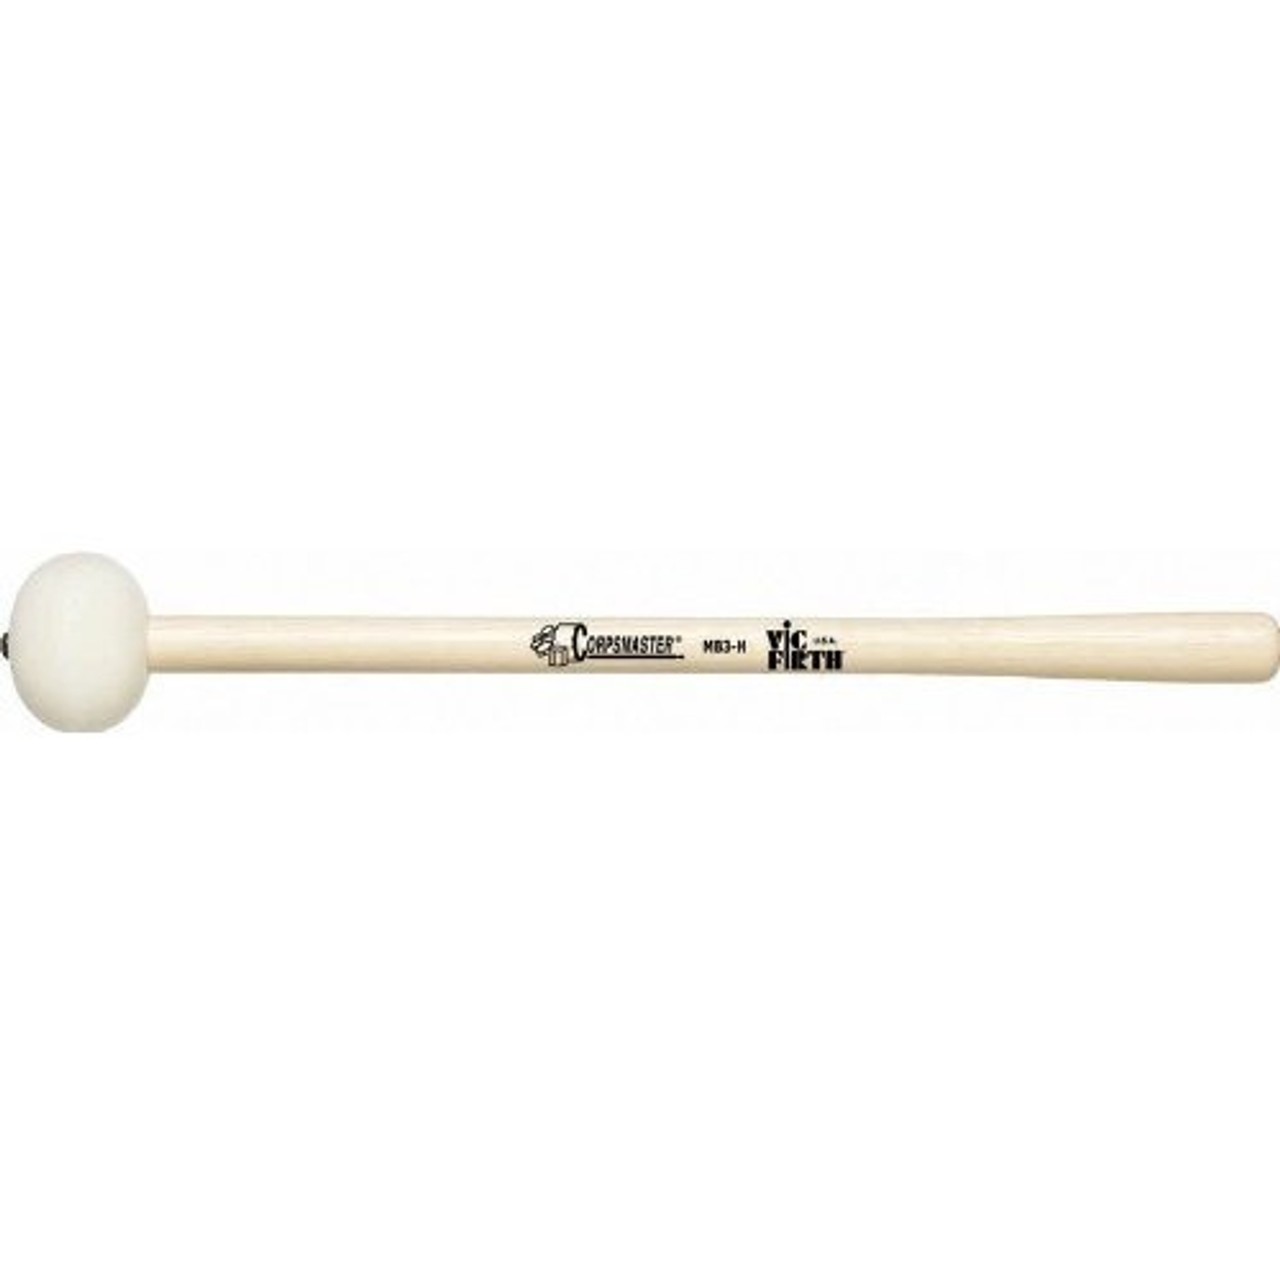 Vic Firth Corpsmaster® Bass Mallet -- Large Head Hard MB3H: 26-28